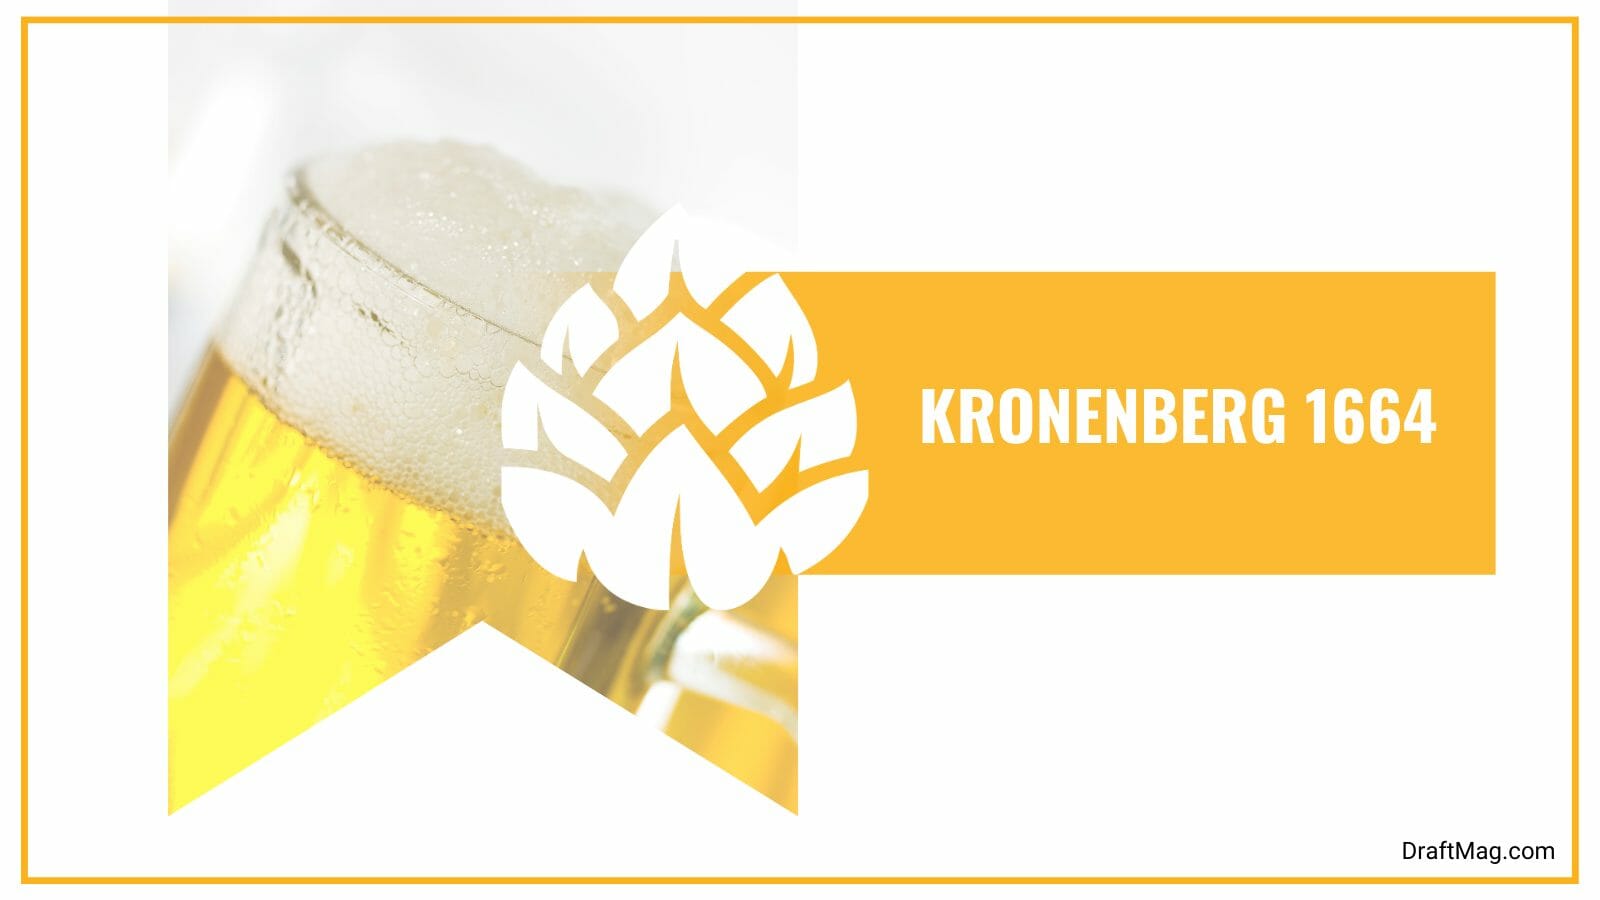 Kronenberg with floral herbs